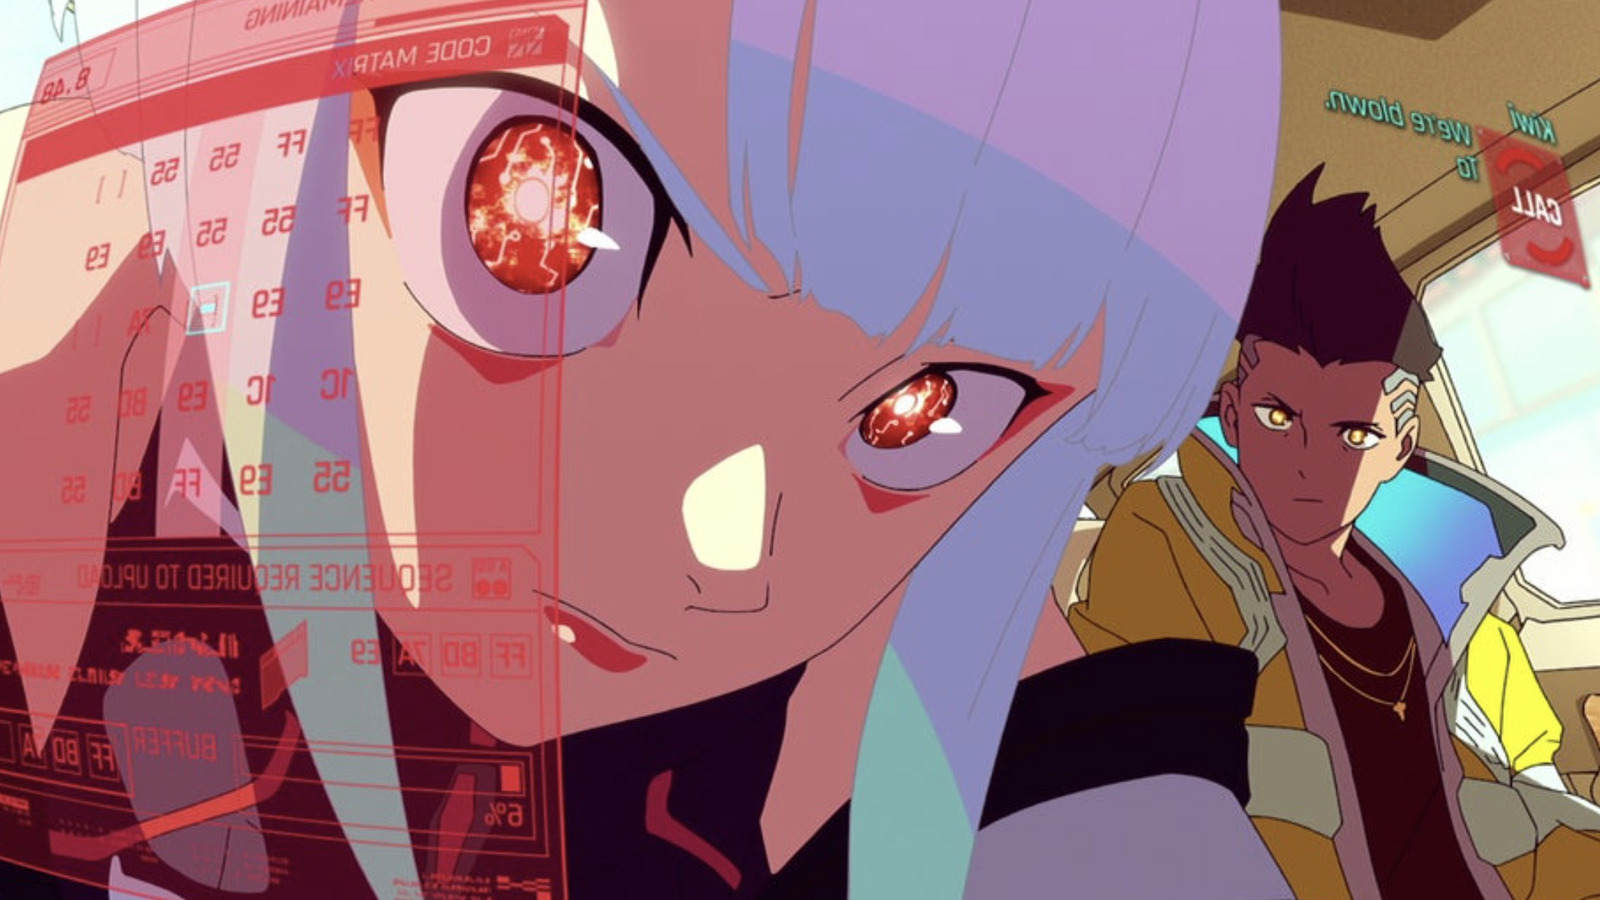 Cyberpunk: Edgerunners Trailer: This NSFW Anime Will Melt Your Face And Rip Your Guts Out